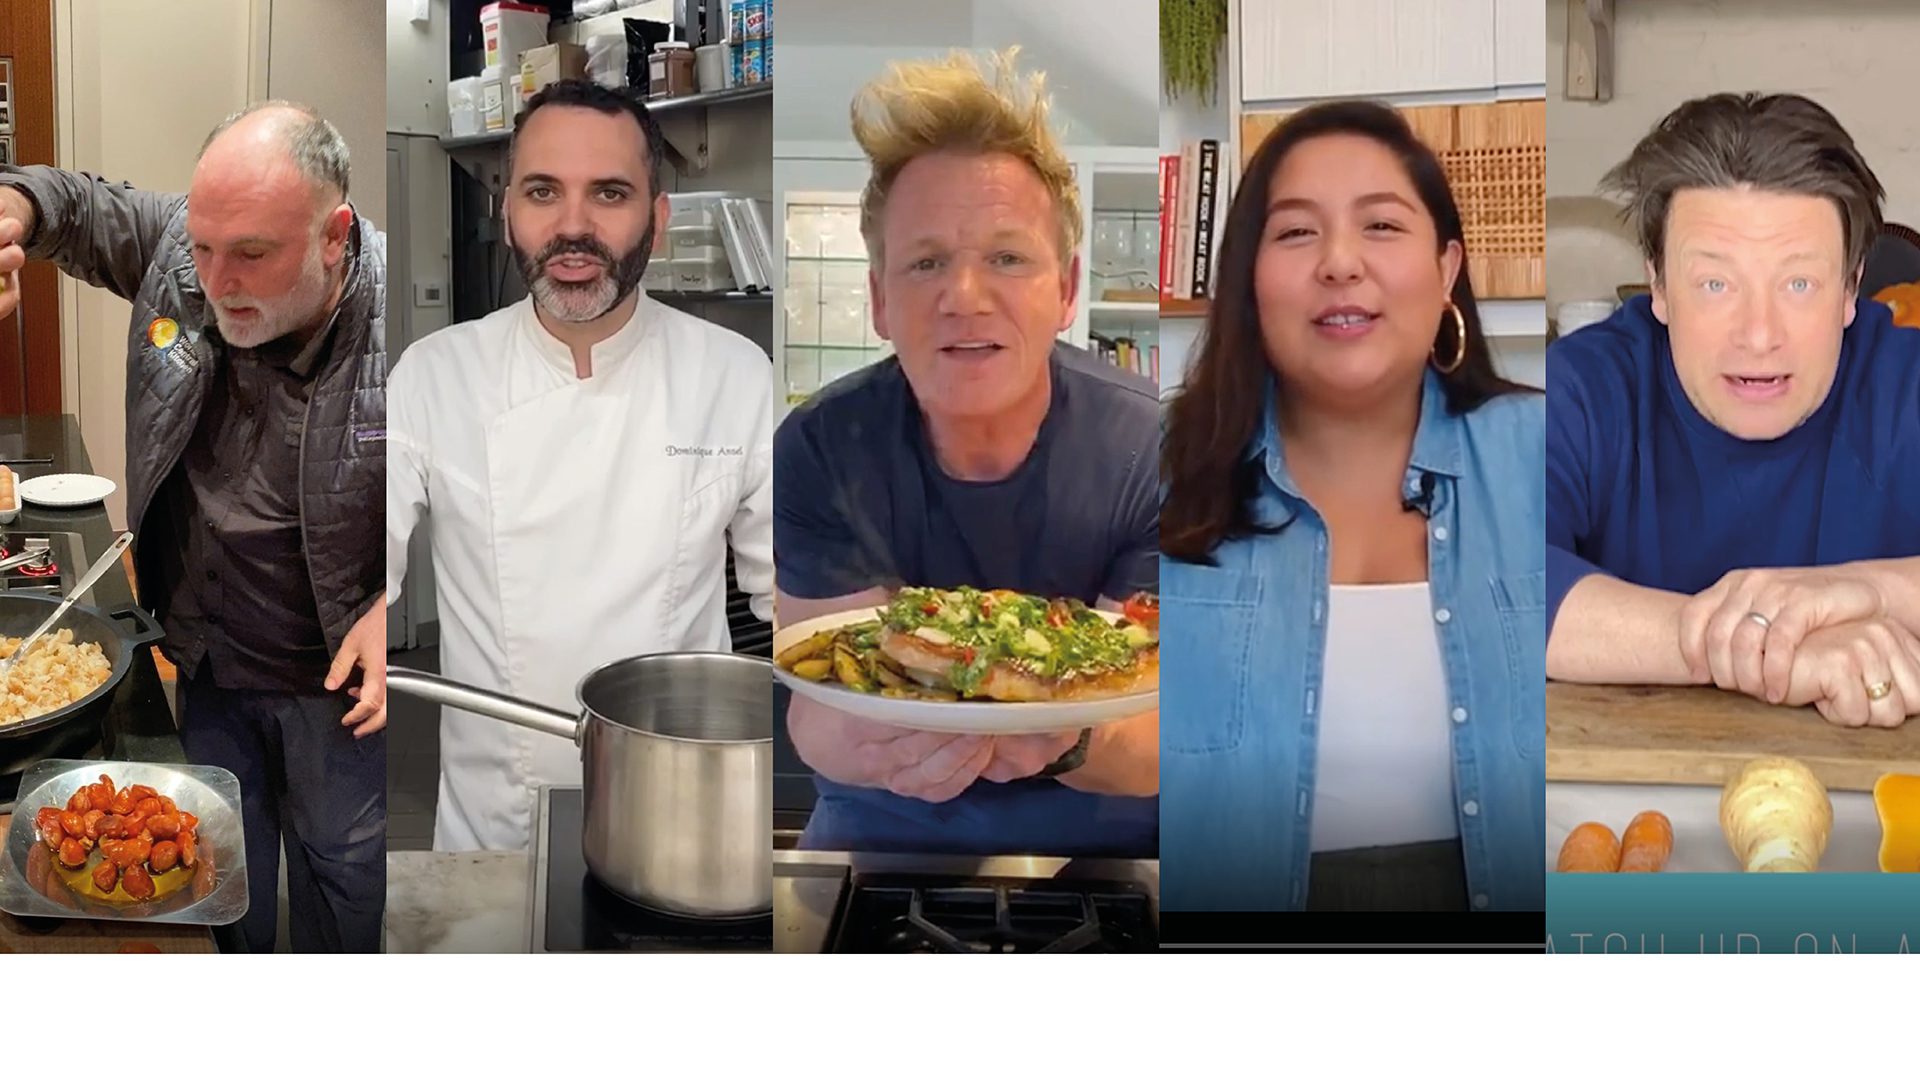 Here are tips to cook and eat like a top chef